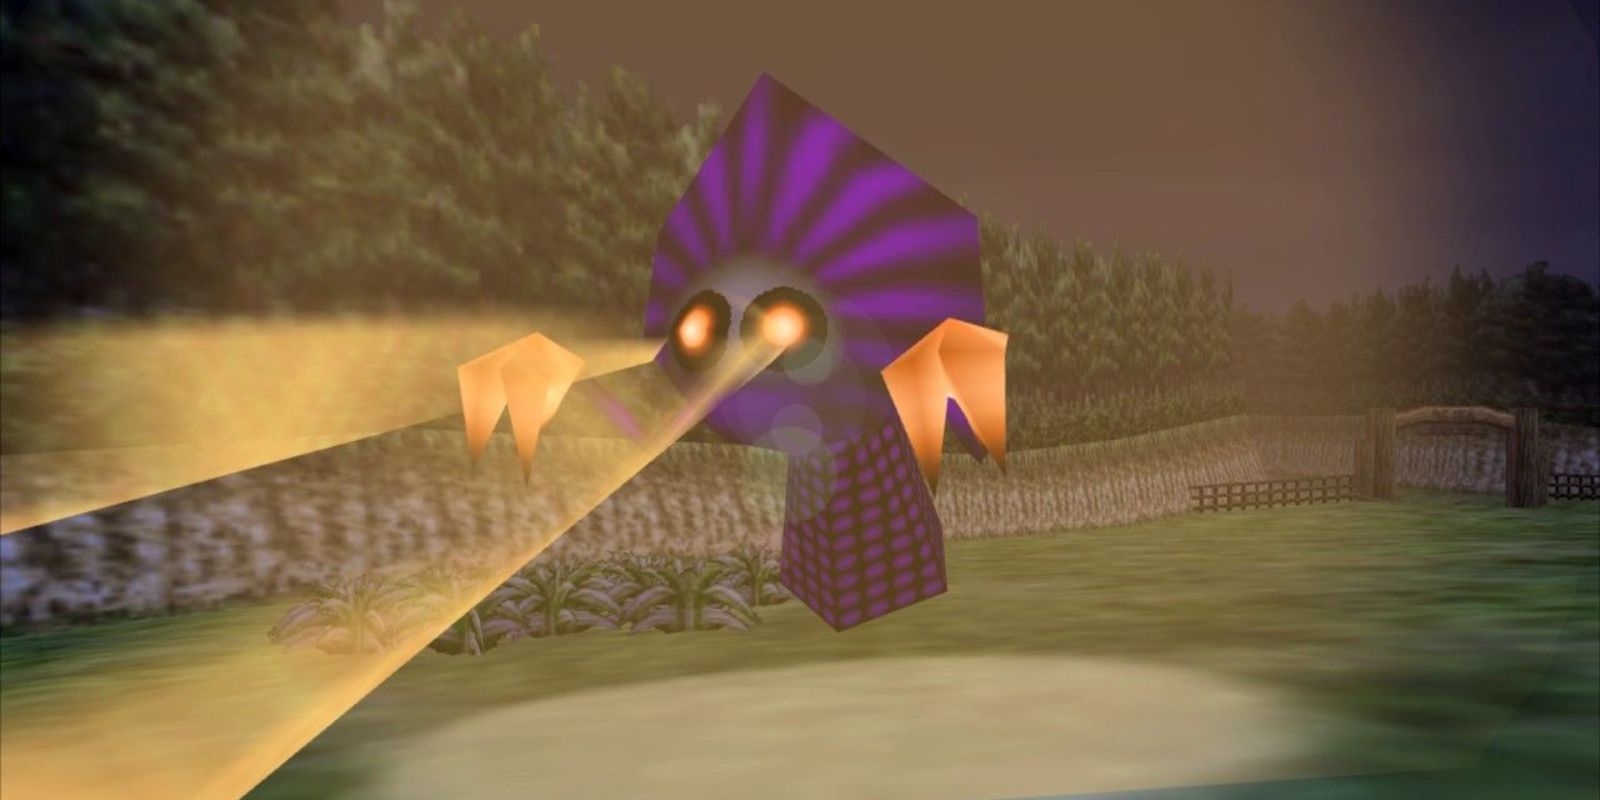 One of the aliens known as Them from The Legend Of Zelda Majora's Mask.